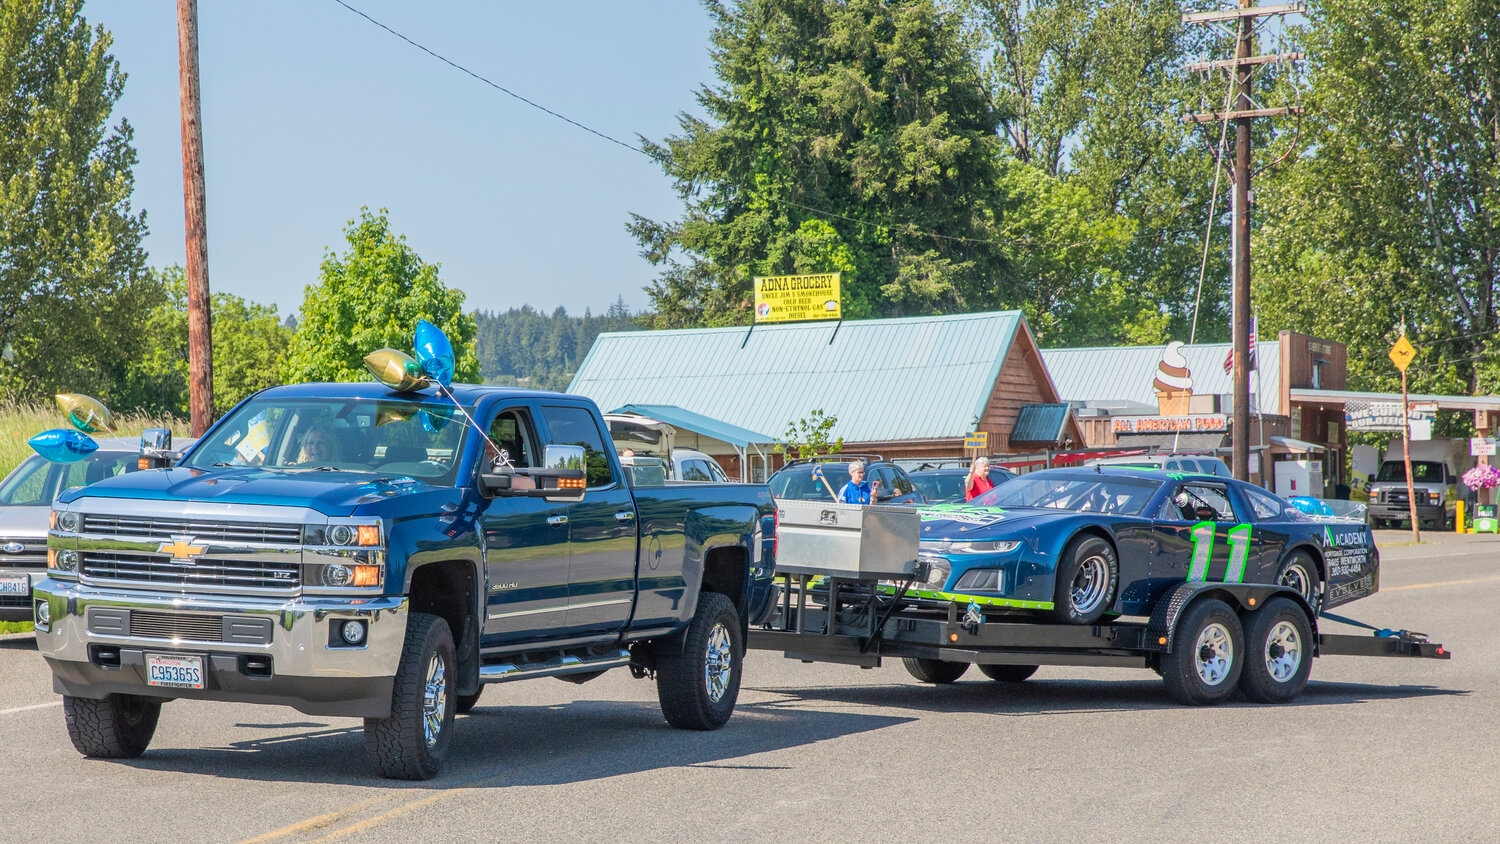 A truck and race car from the Academy Mortgage Corporation leads the Adna High School baseball team during a sendoff ceremony before state on Thursday, May 25.